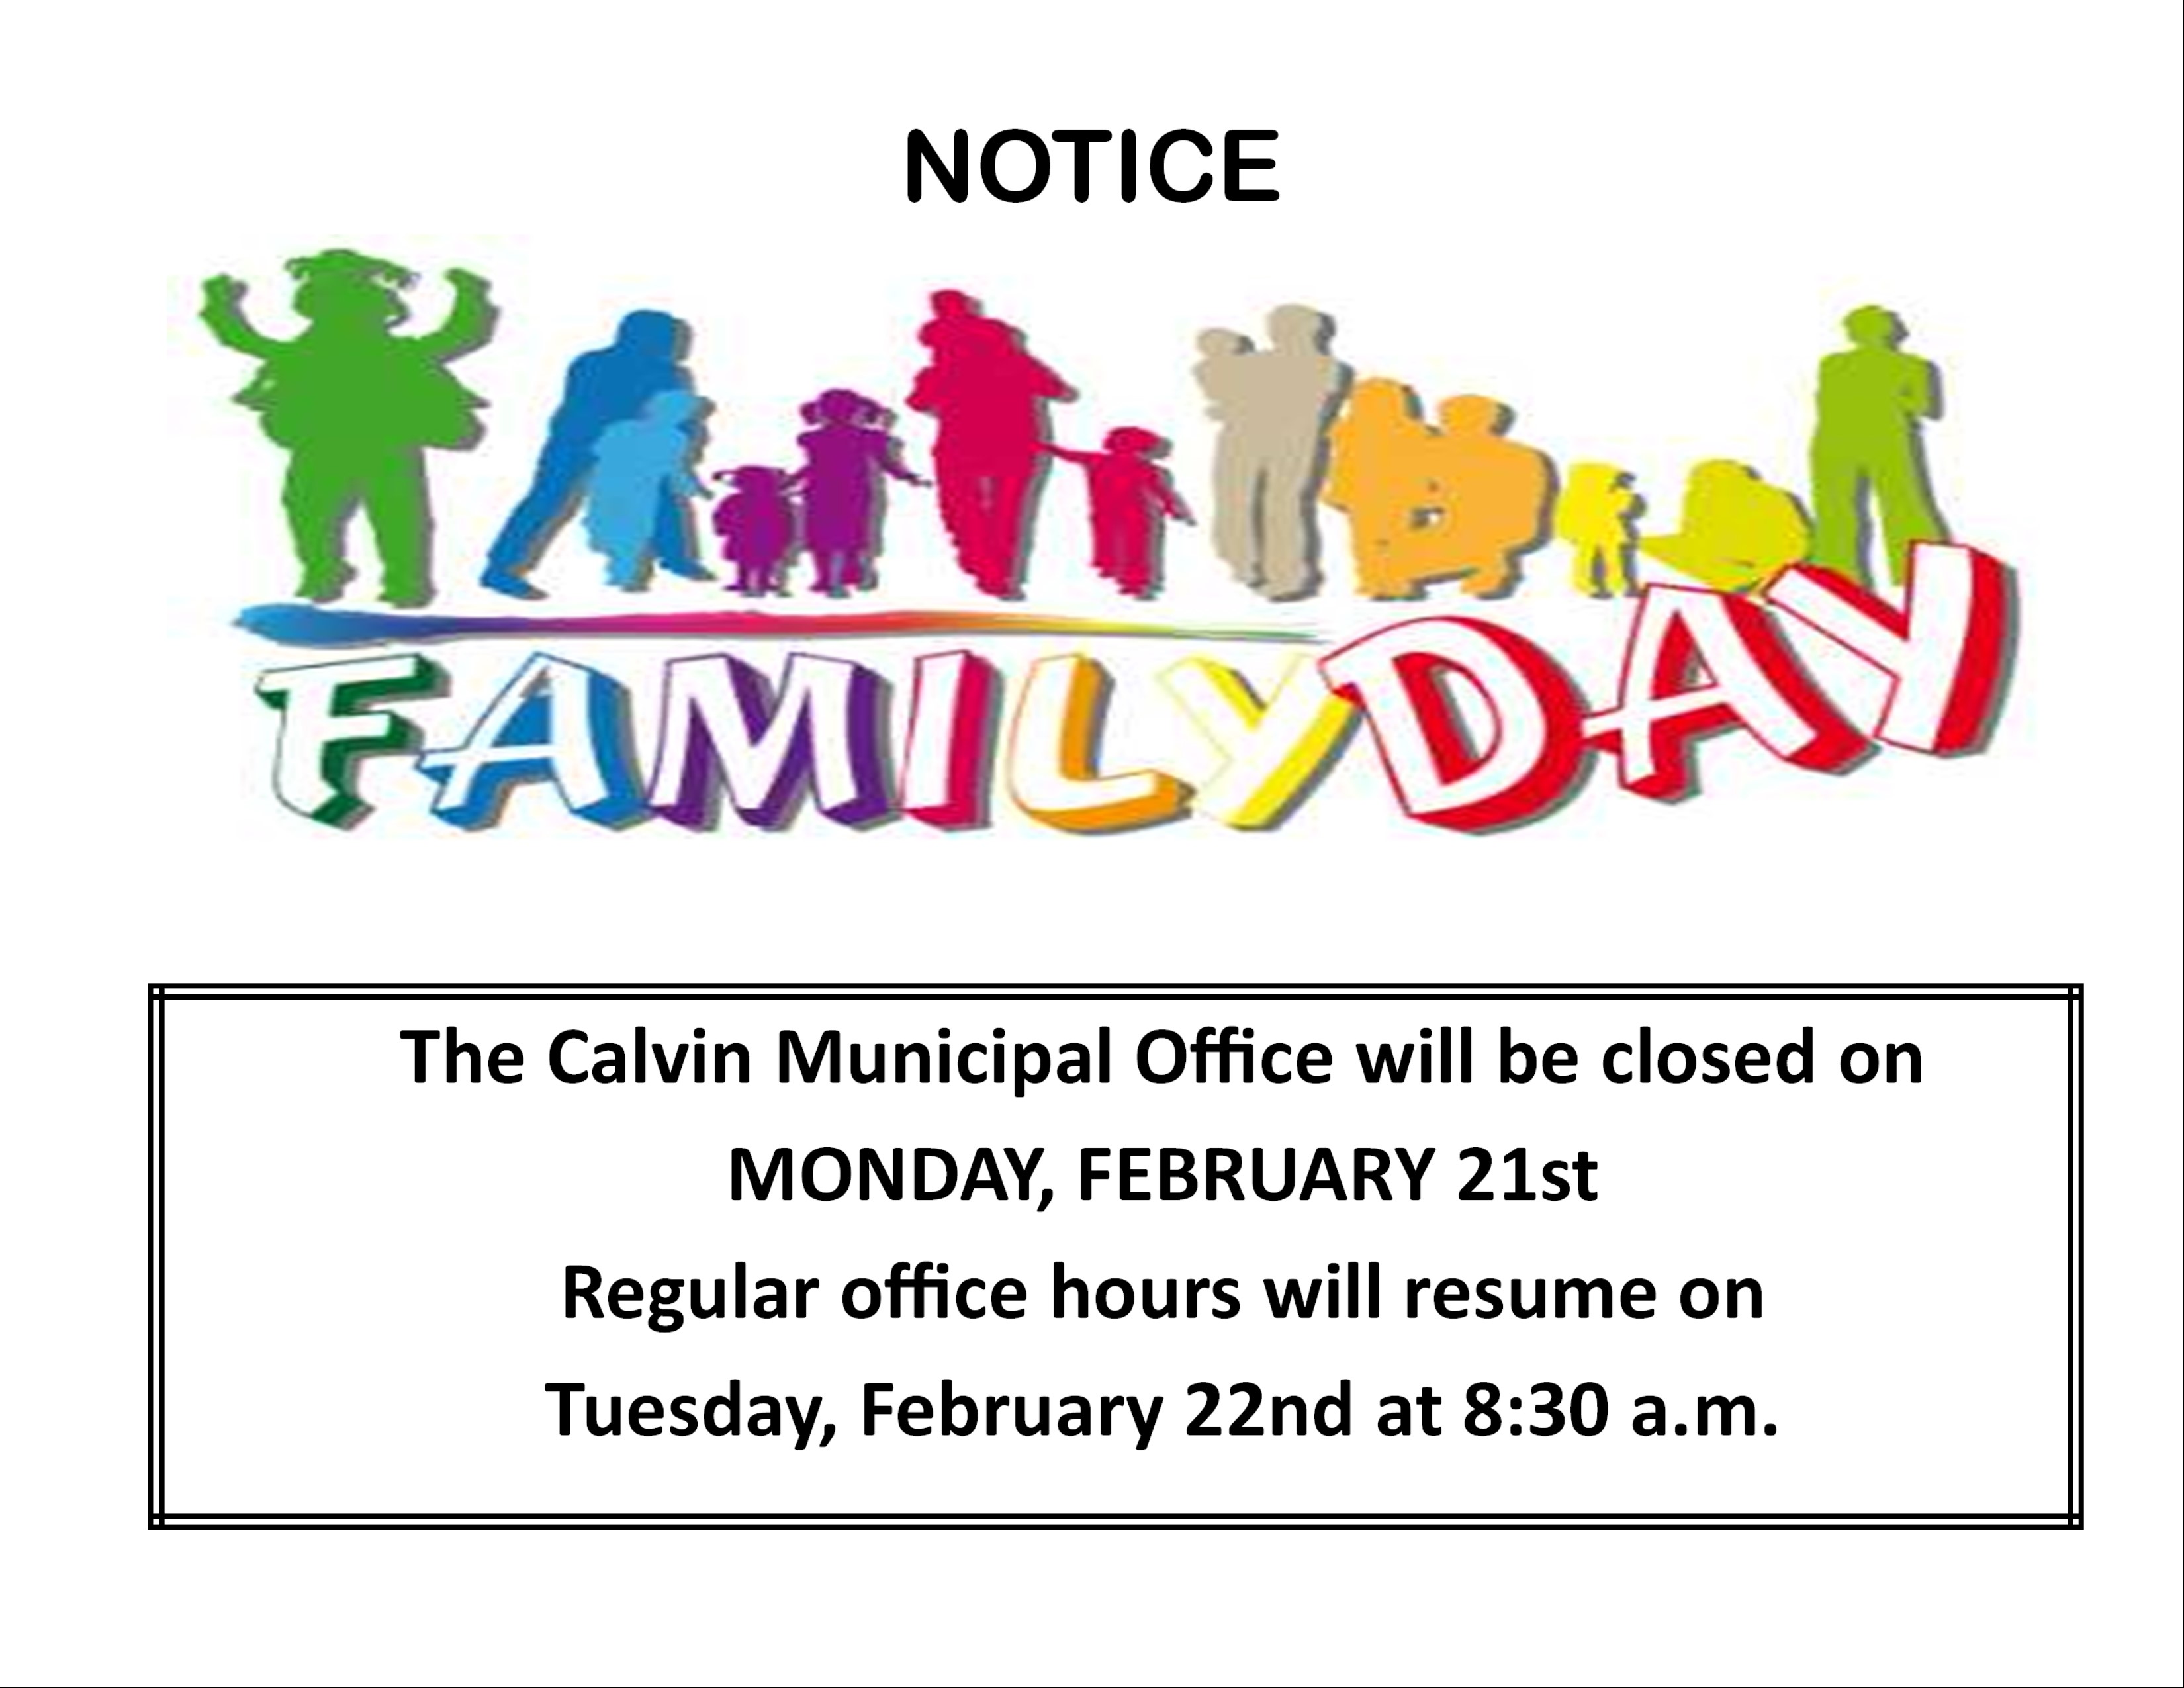 Municipal Office Closed for Family Day